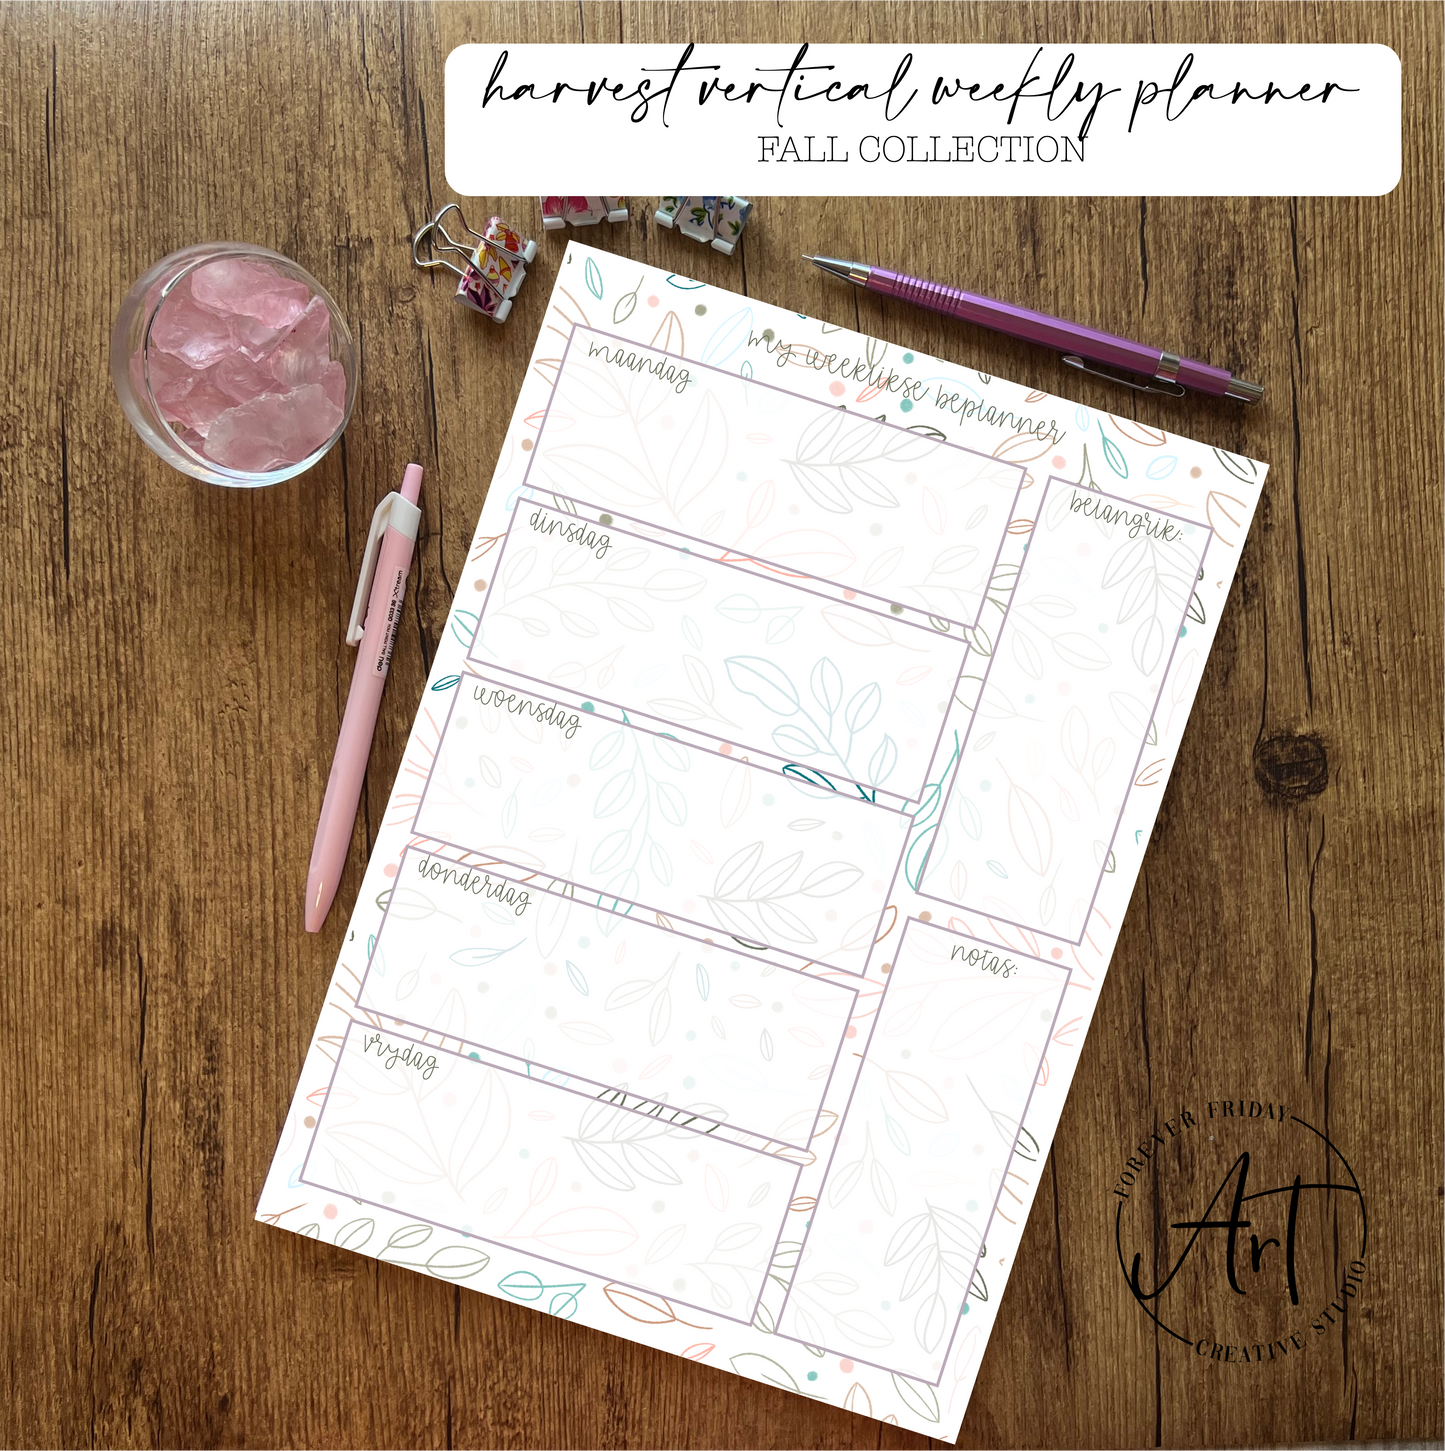 Harvest Weekly Planner: Fall Collection